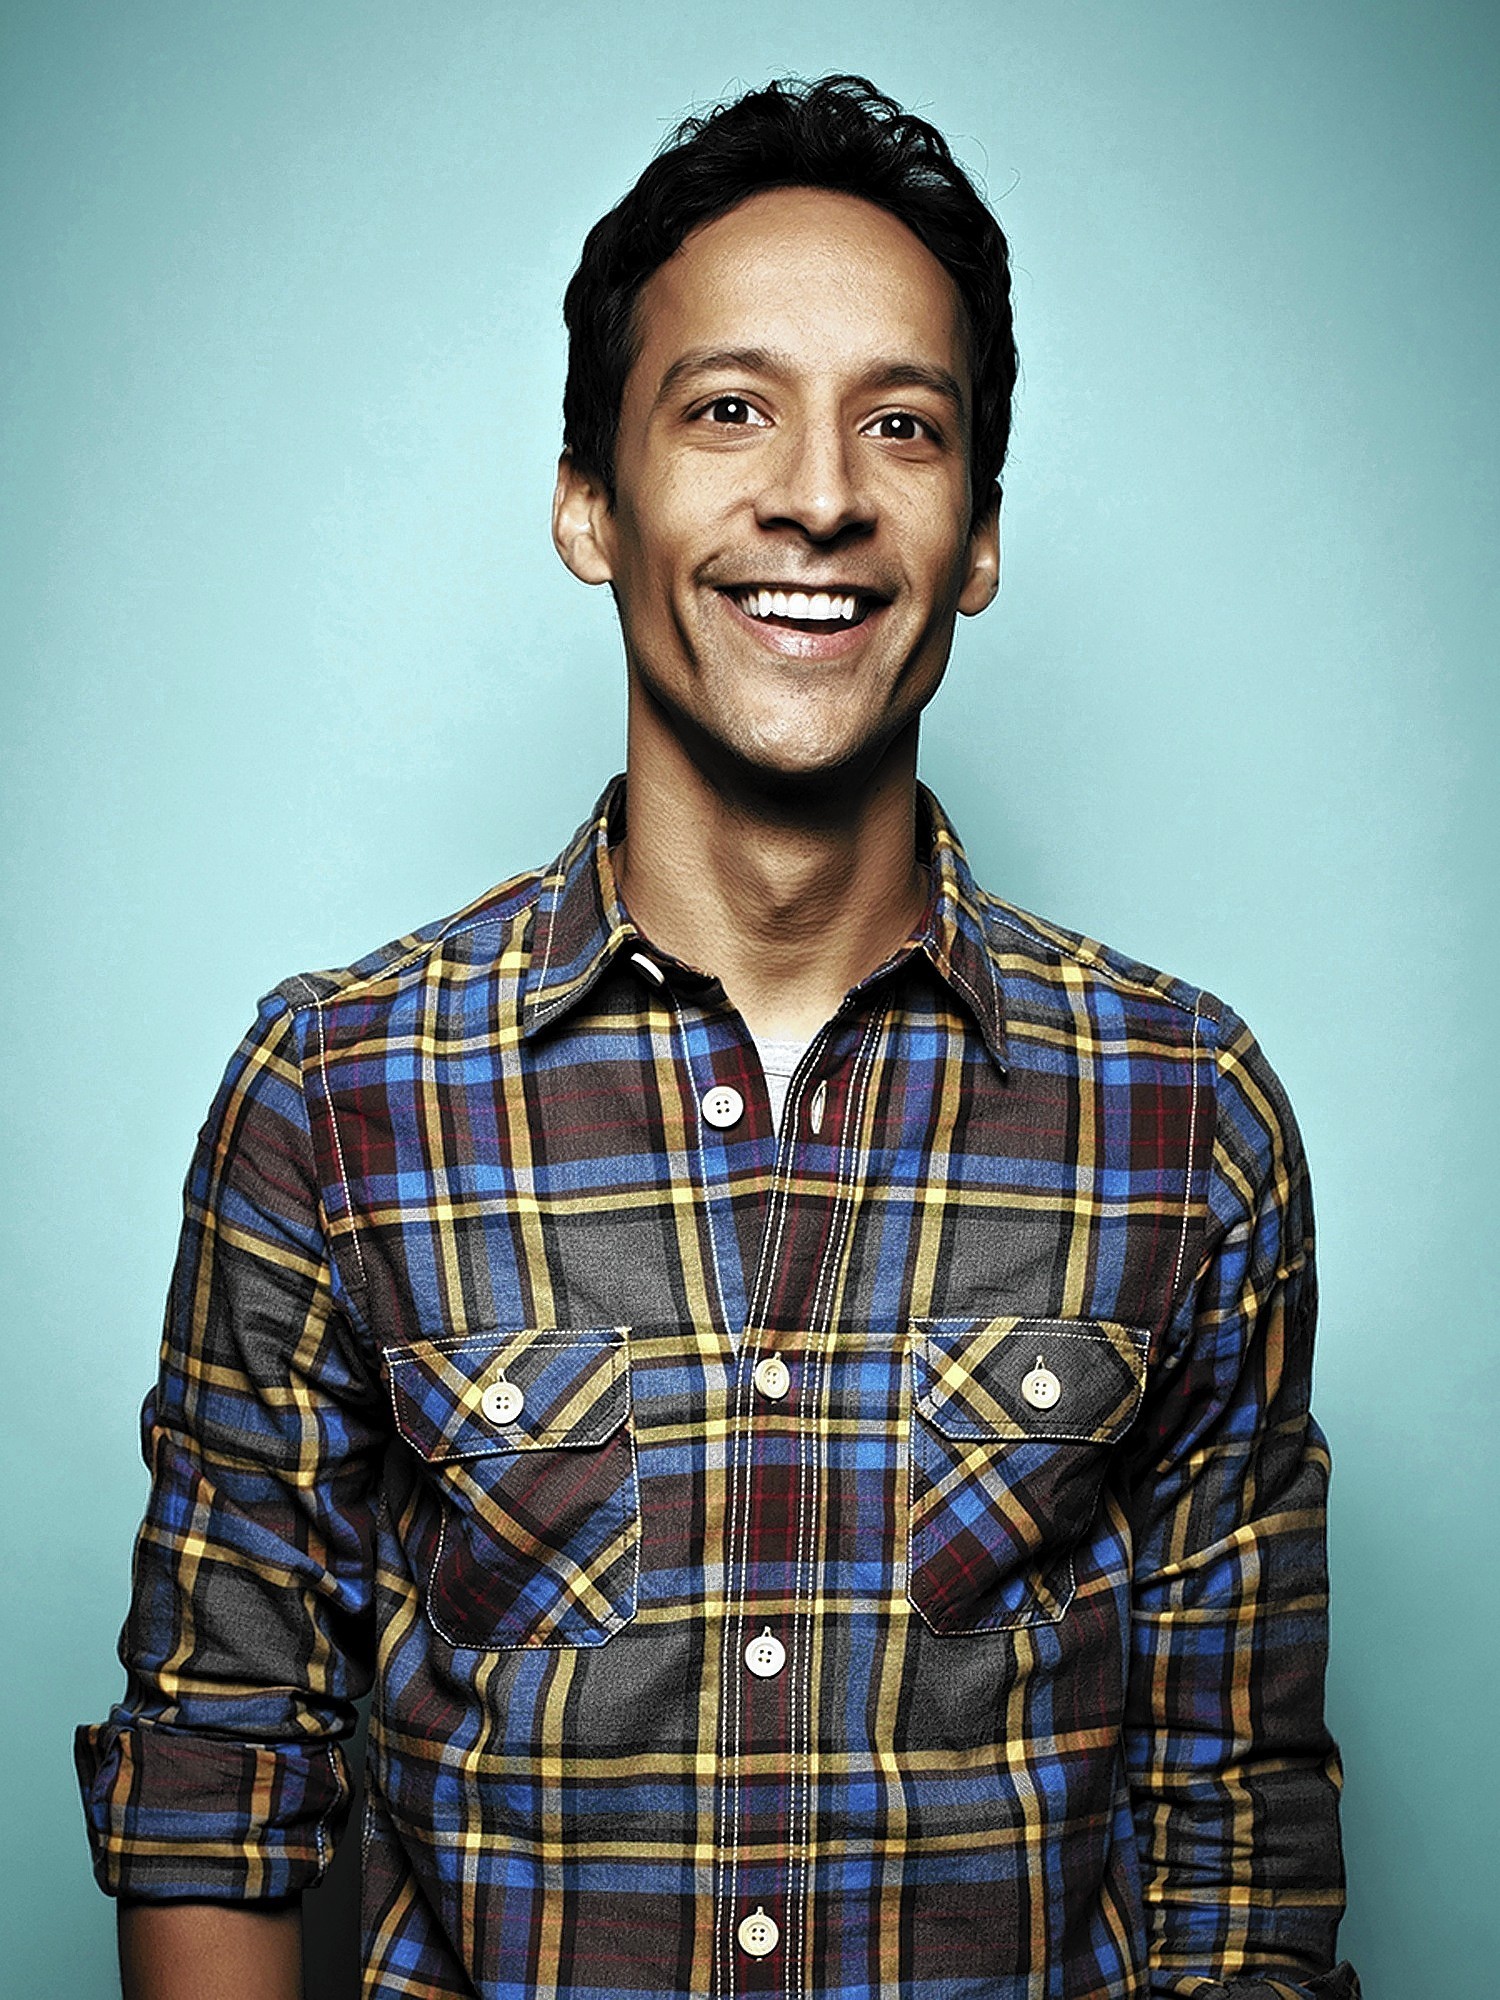 Danny Pudi on Season 5 of Community and his new 30 for 30 film for ESPN